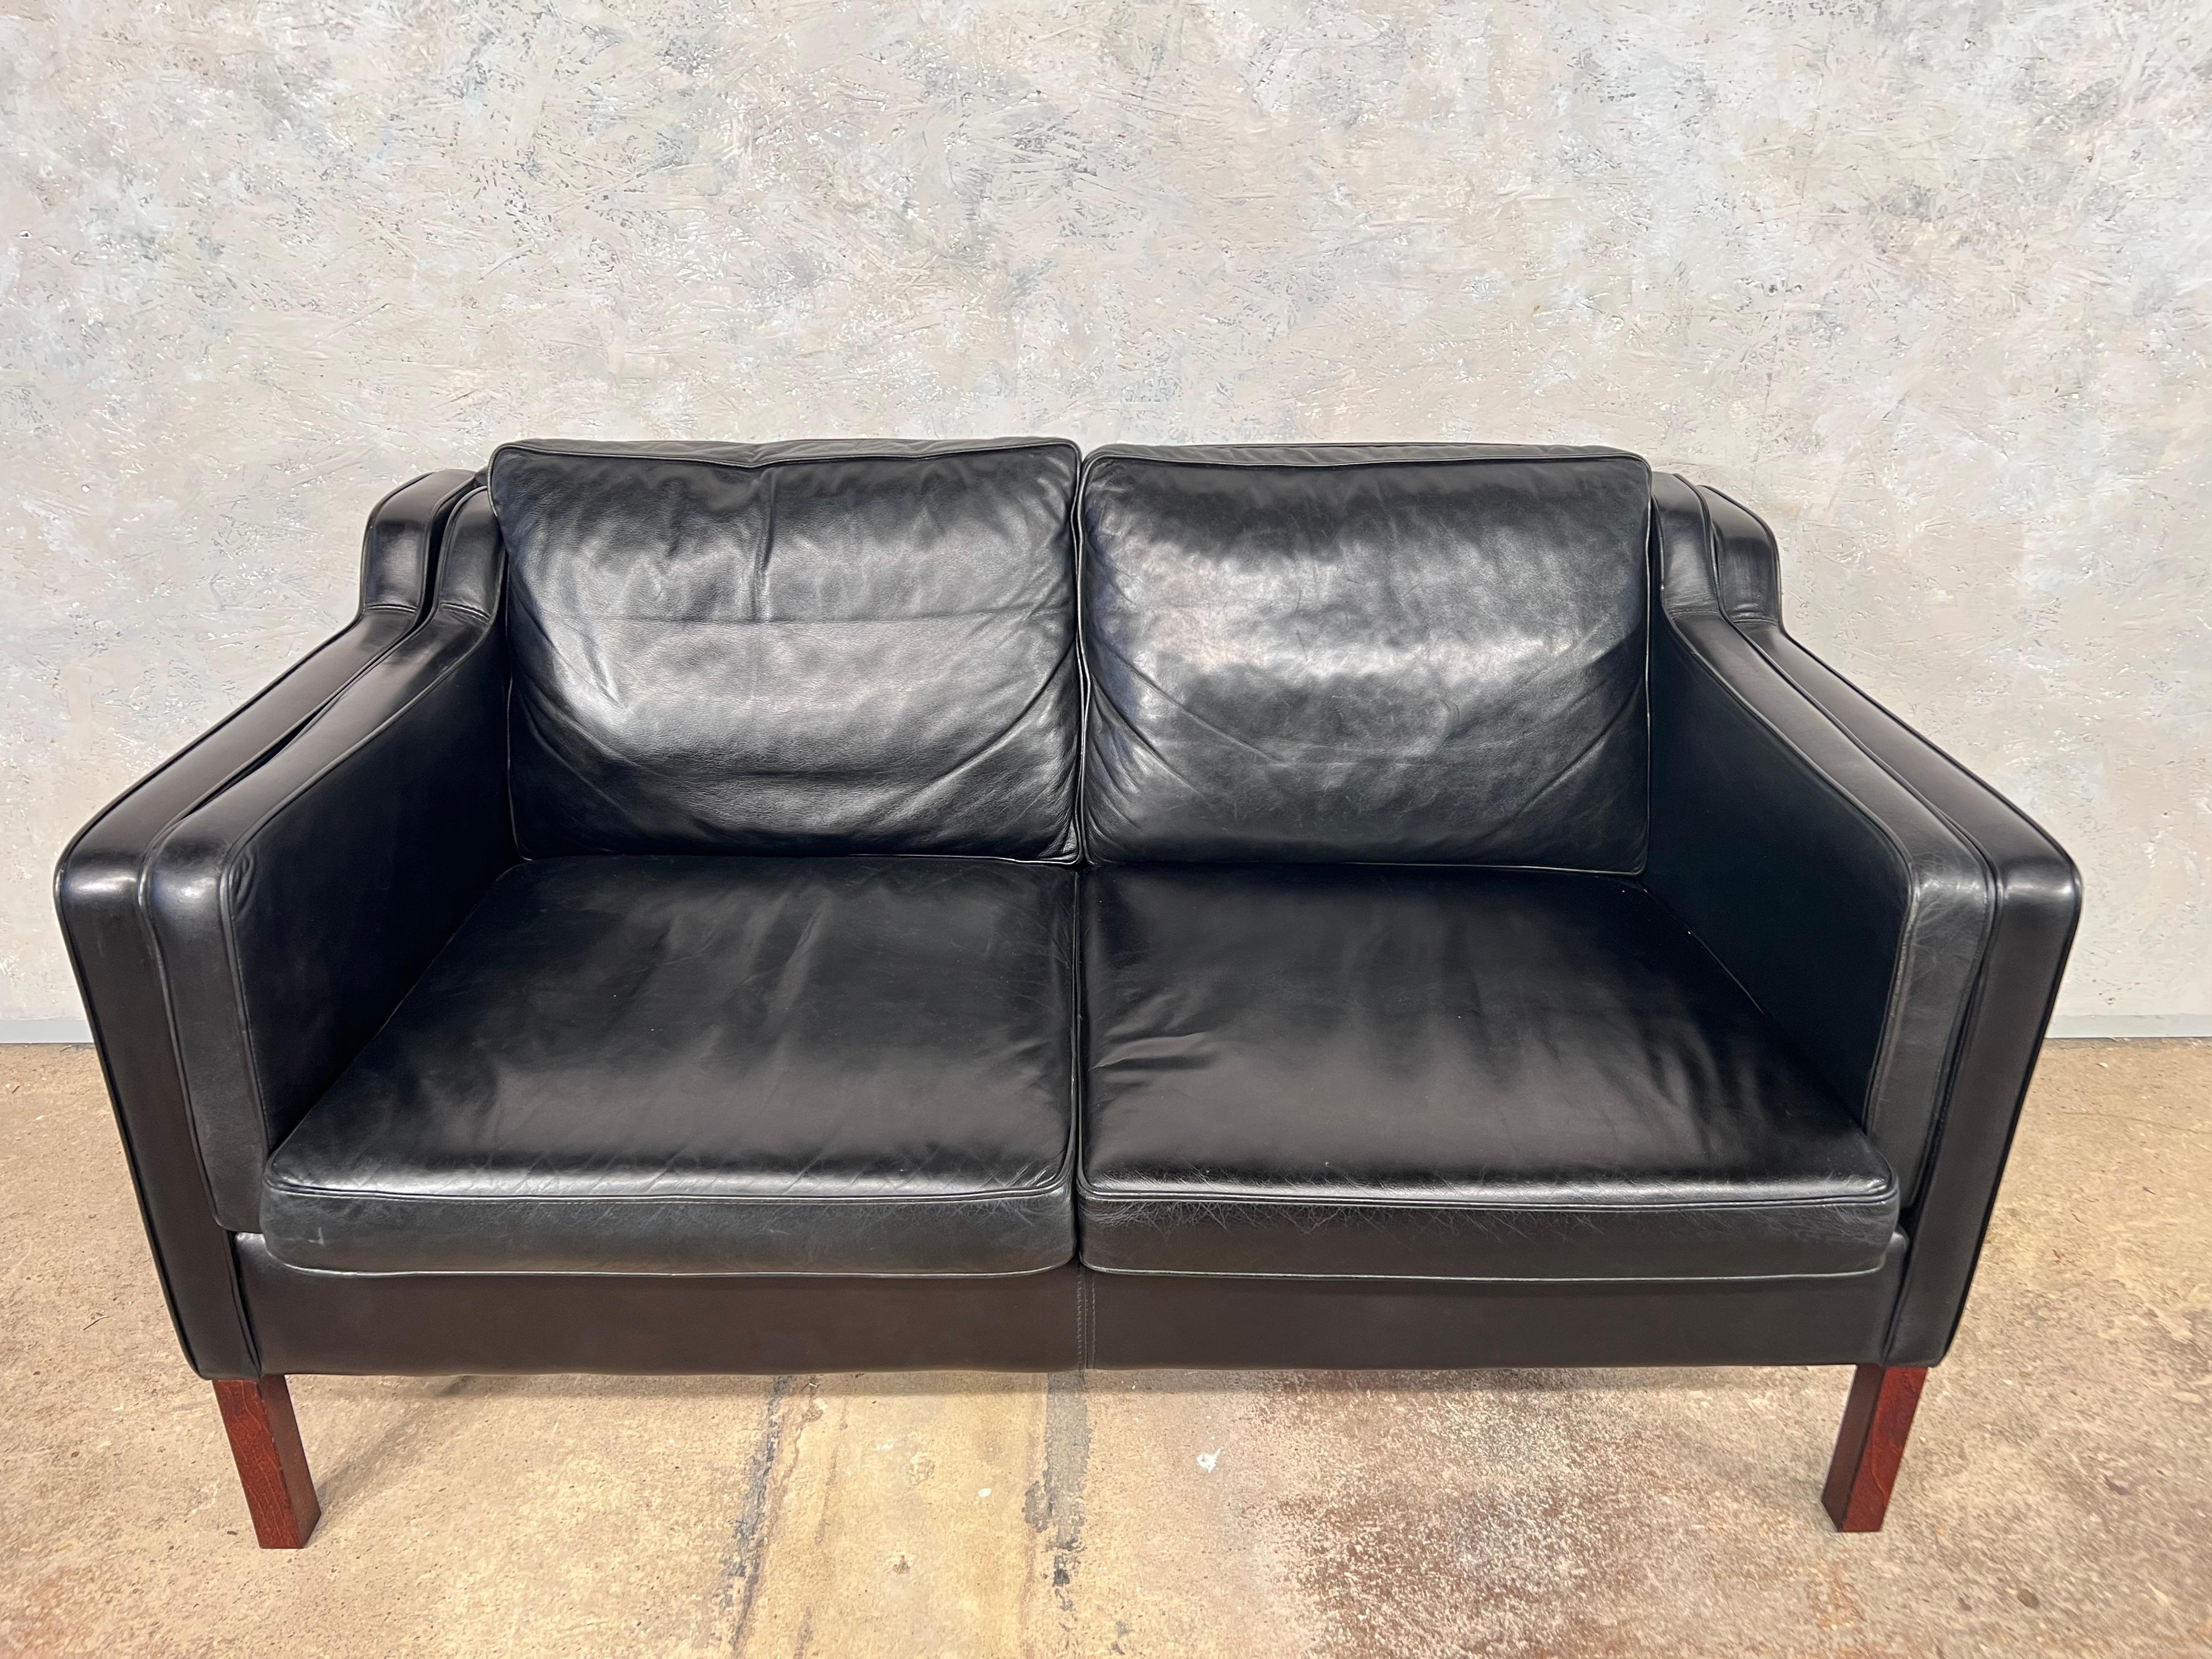 A Stylish 1970s Sofa , great design with beautiful lines, sits wonderfully, made by Stouby Denmark.

Soft black Italian leather, which has a very comfortable feel and a shiny patina.

In great Vintage condition.

